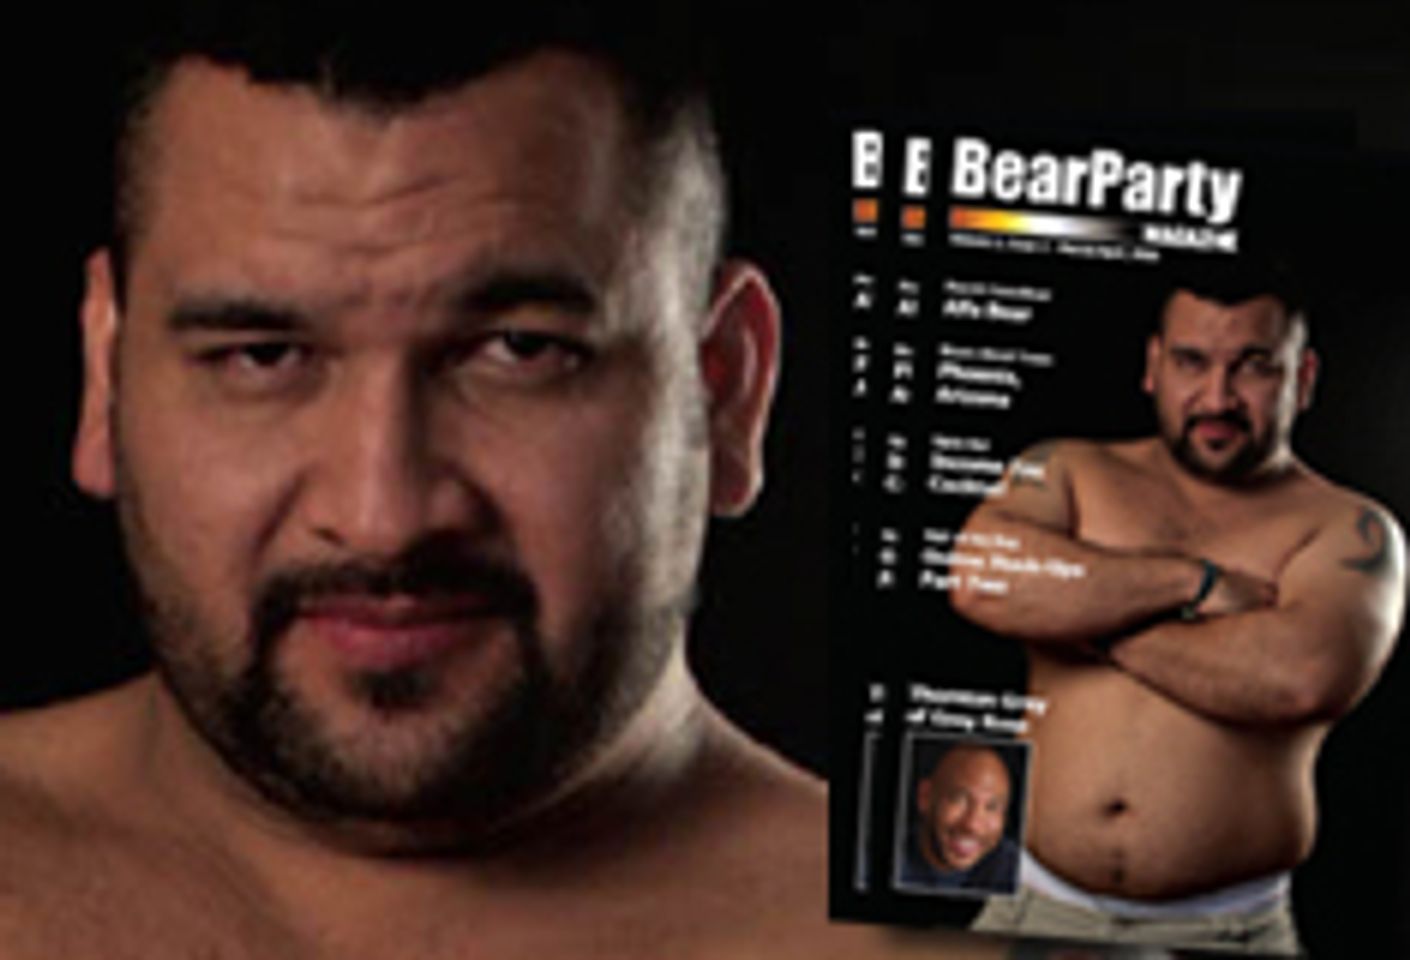 BearParty Magazine Offers Tips for Bear Hunting